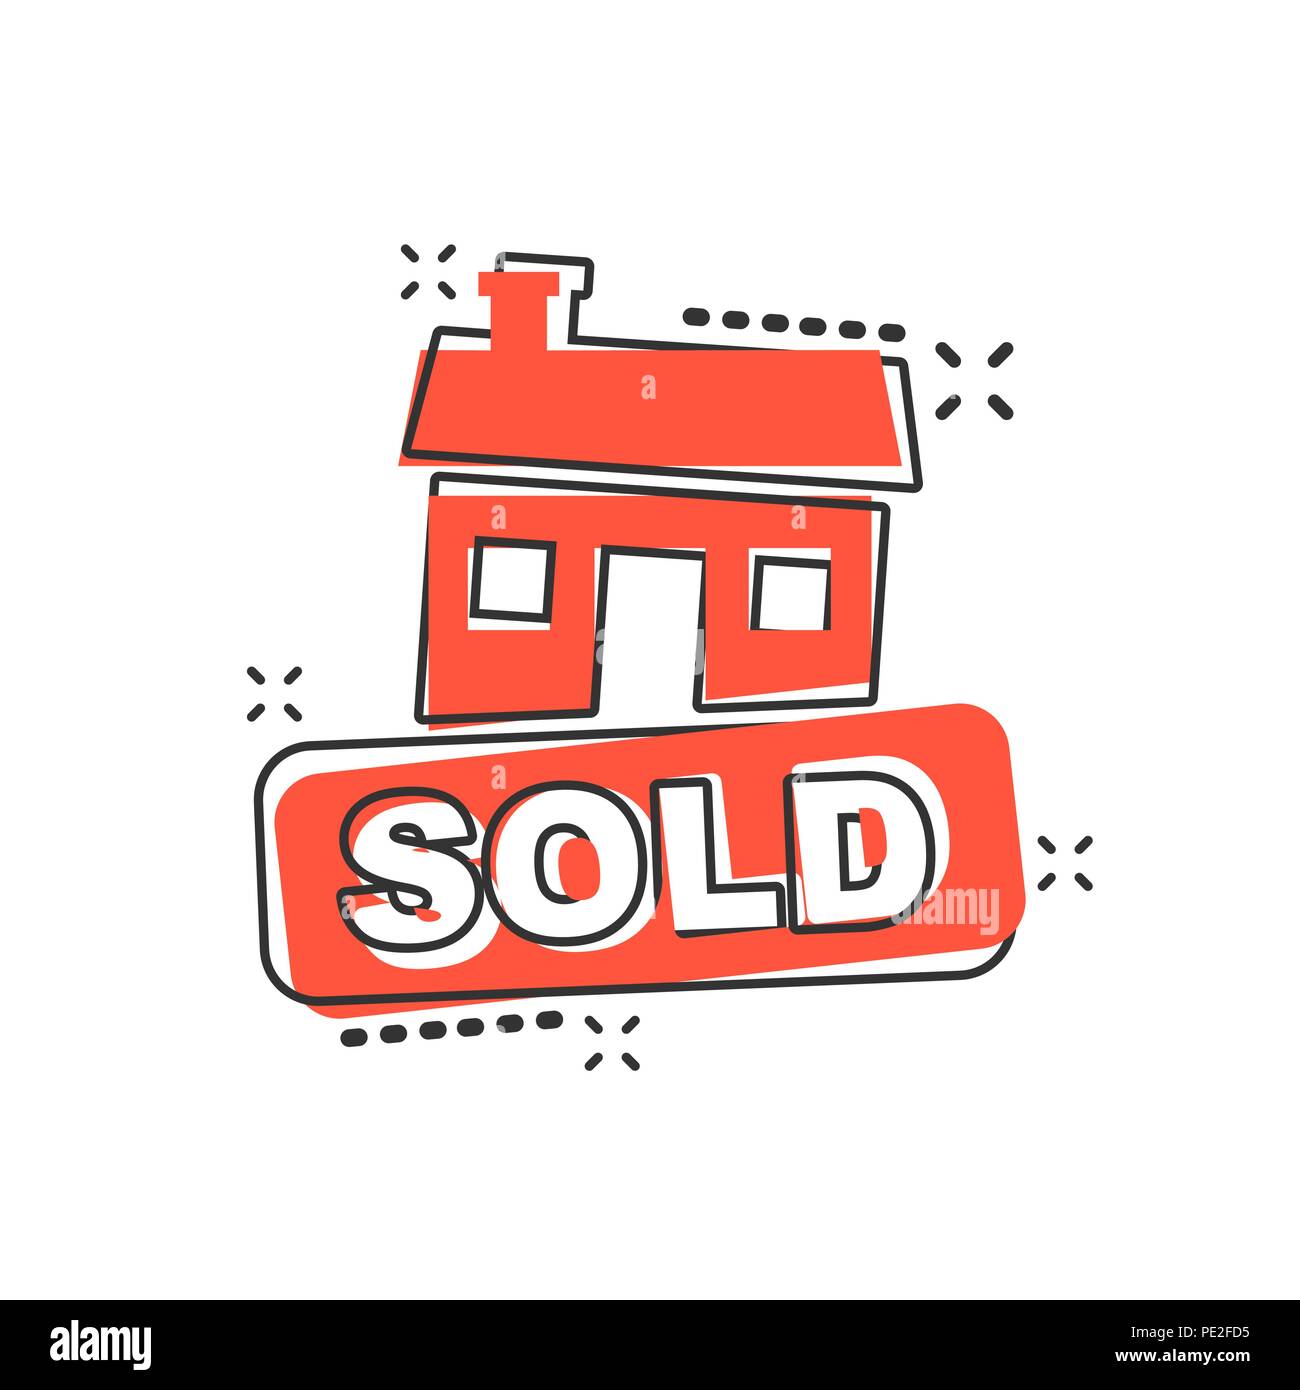 Vector cartoon sold house icon in comic style. Sold sign illustration pictogram. Purchasing business splash effect concept. Stock Vector